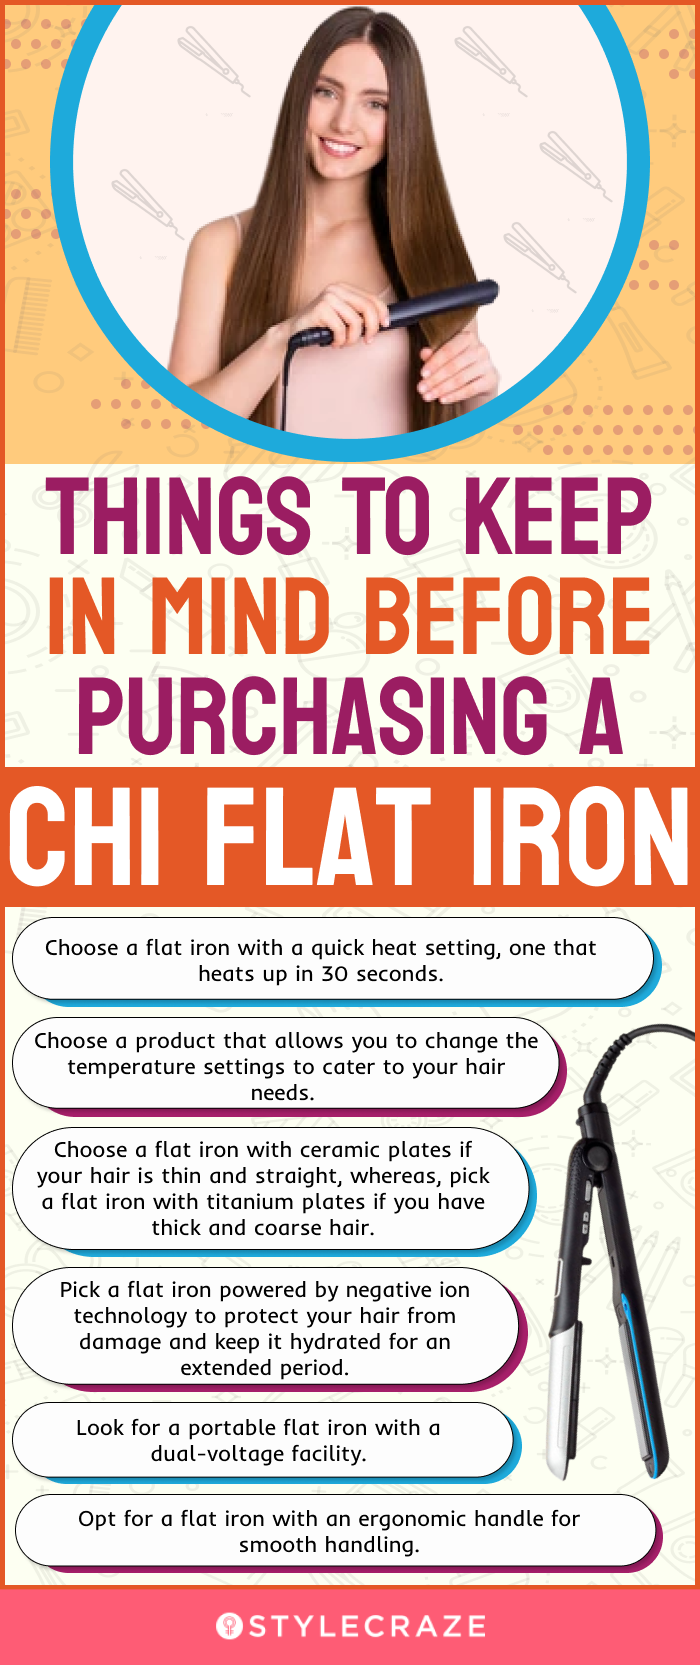 Things To Keep In Mind Before Purchasing A CHI Flat Iron (infographic)